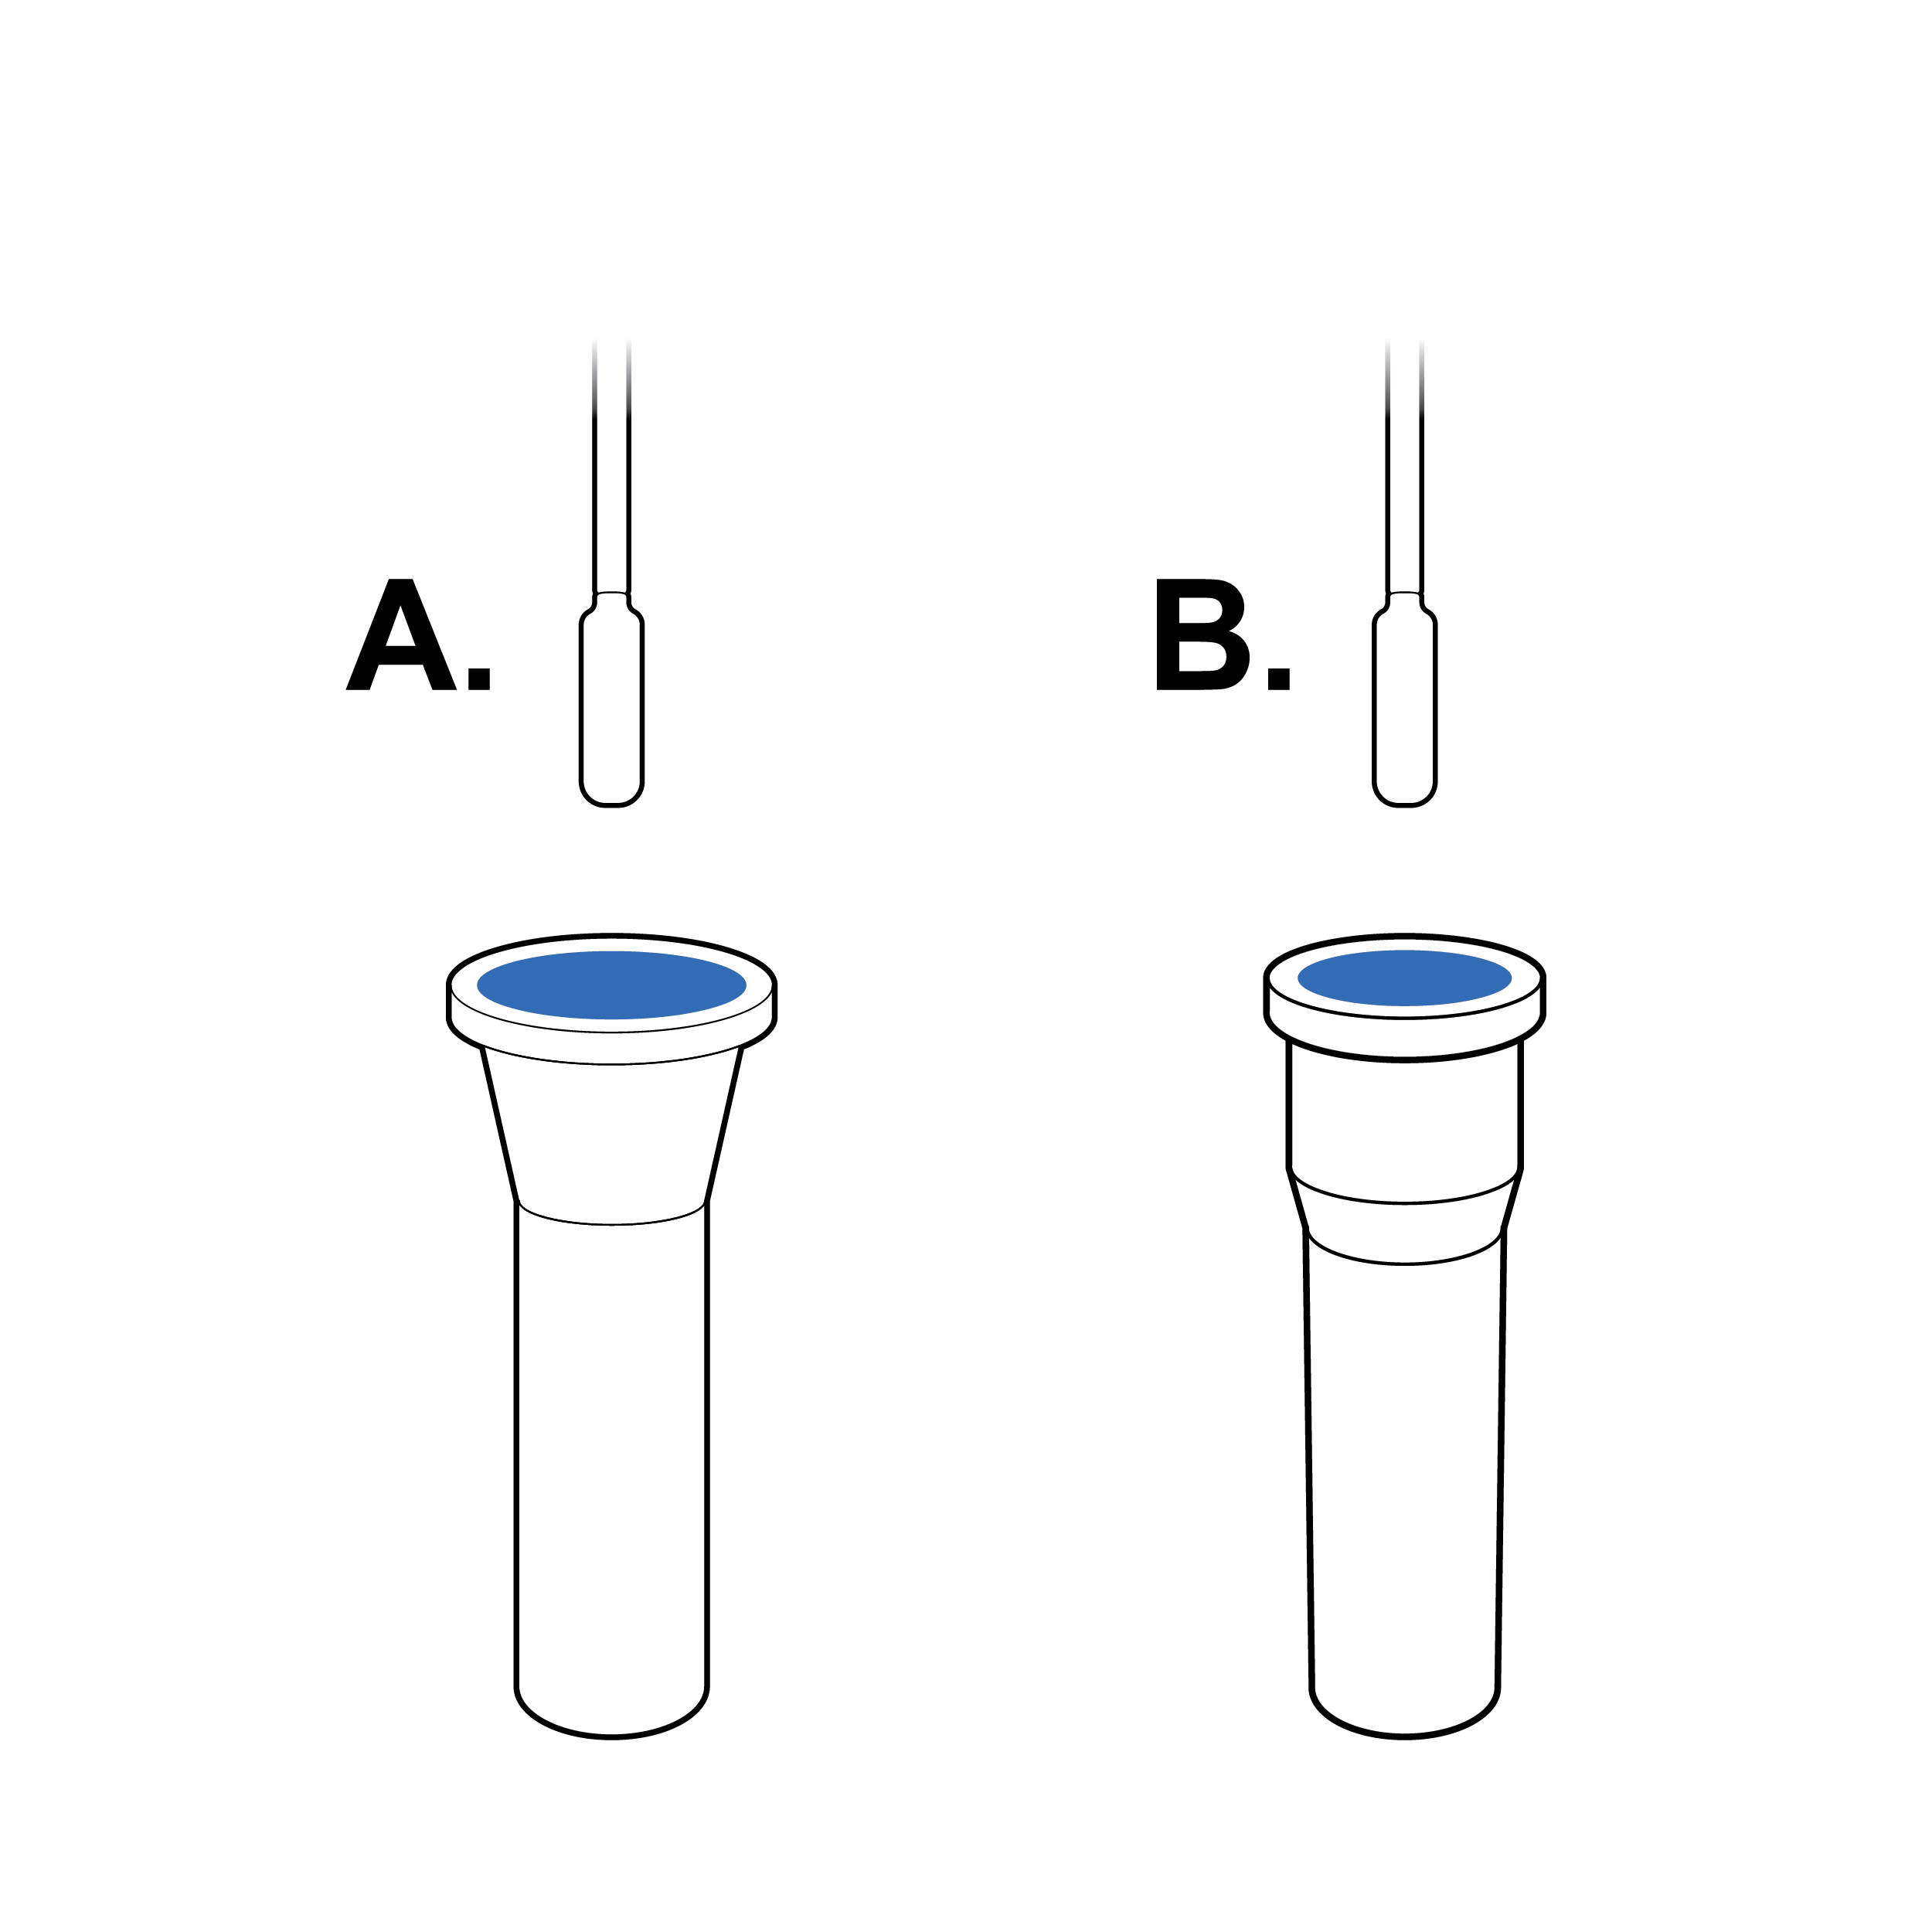 Two options are illustrated. The fluid vial openings in both A and B vials are shaded blue, indicating easier insertion of the swab. Under option A, the top of the vial is tapered in a funnel shape. Under option B, the top of the vial is wide and steps down near the mid-section of the vial.